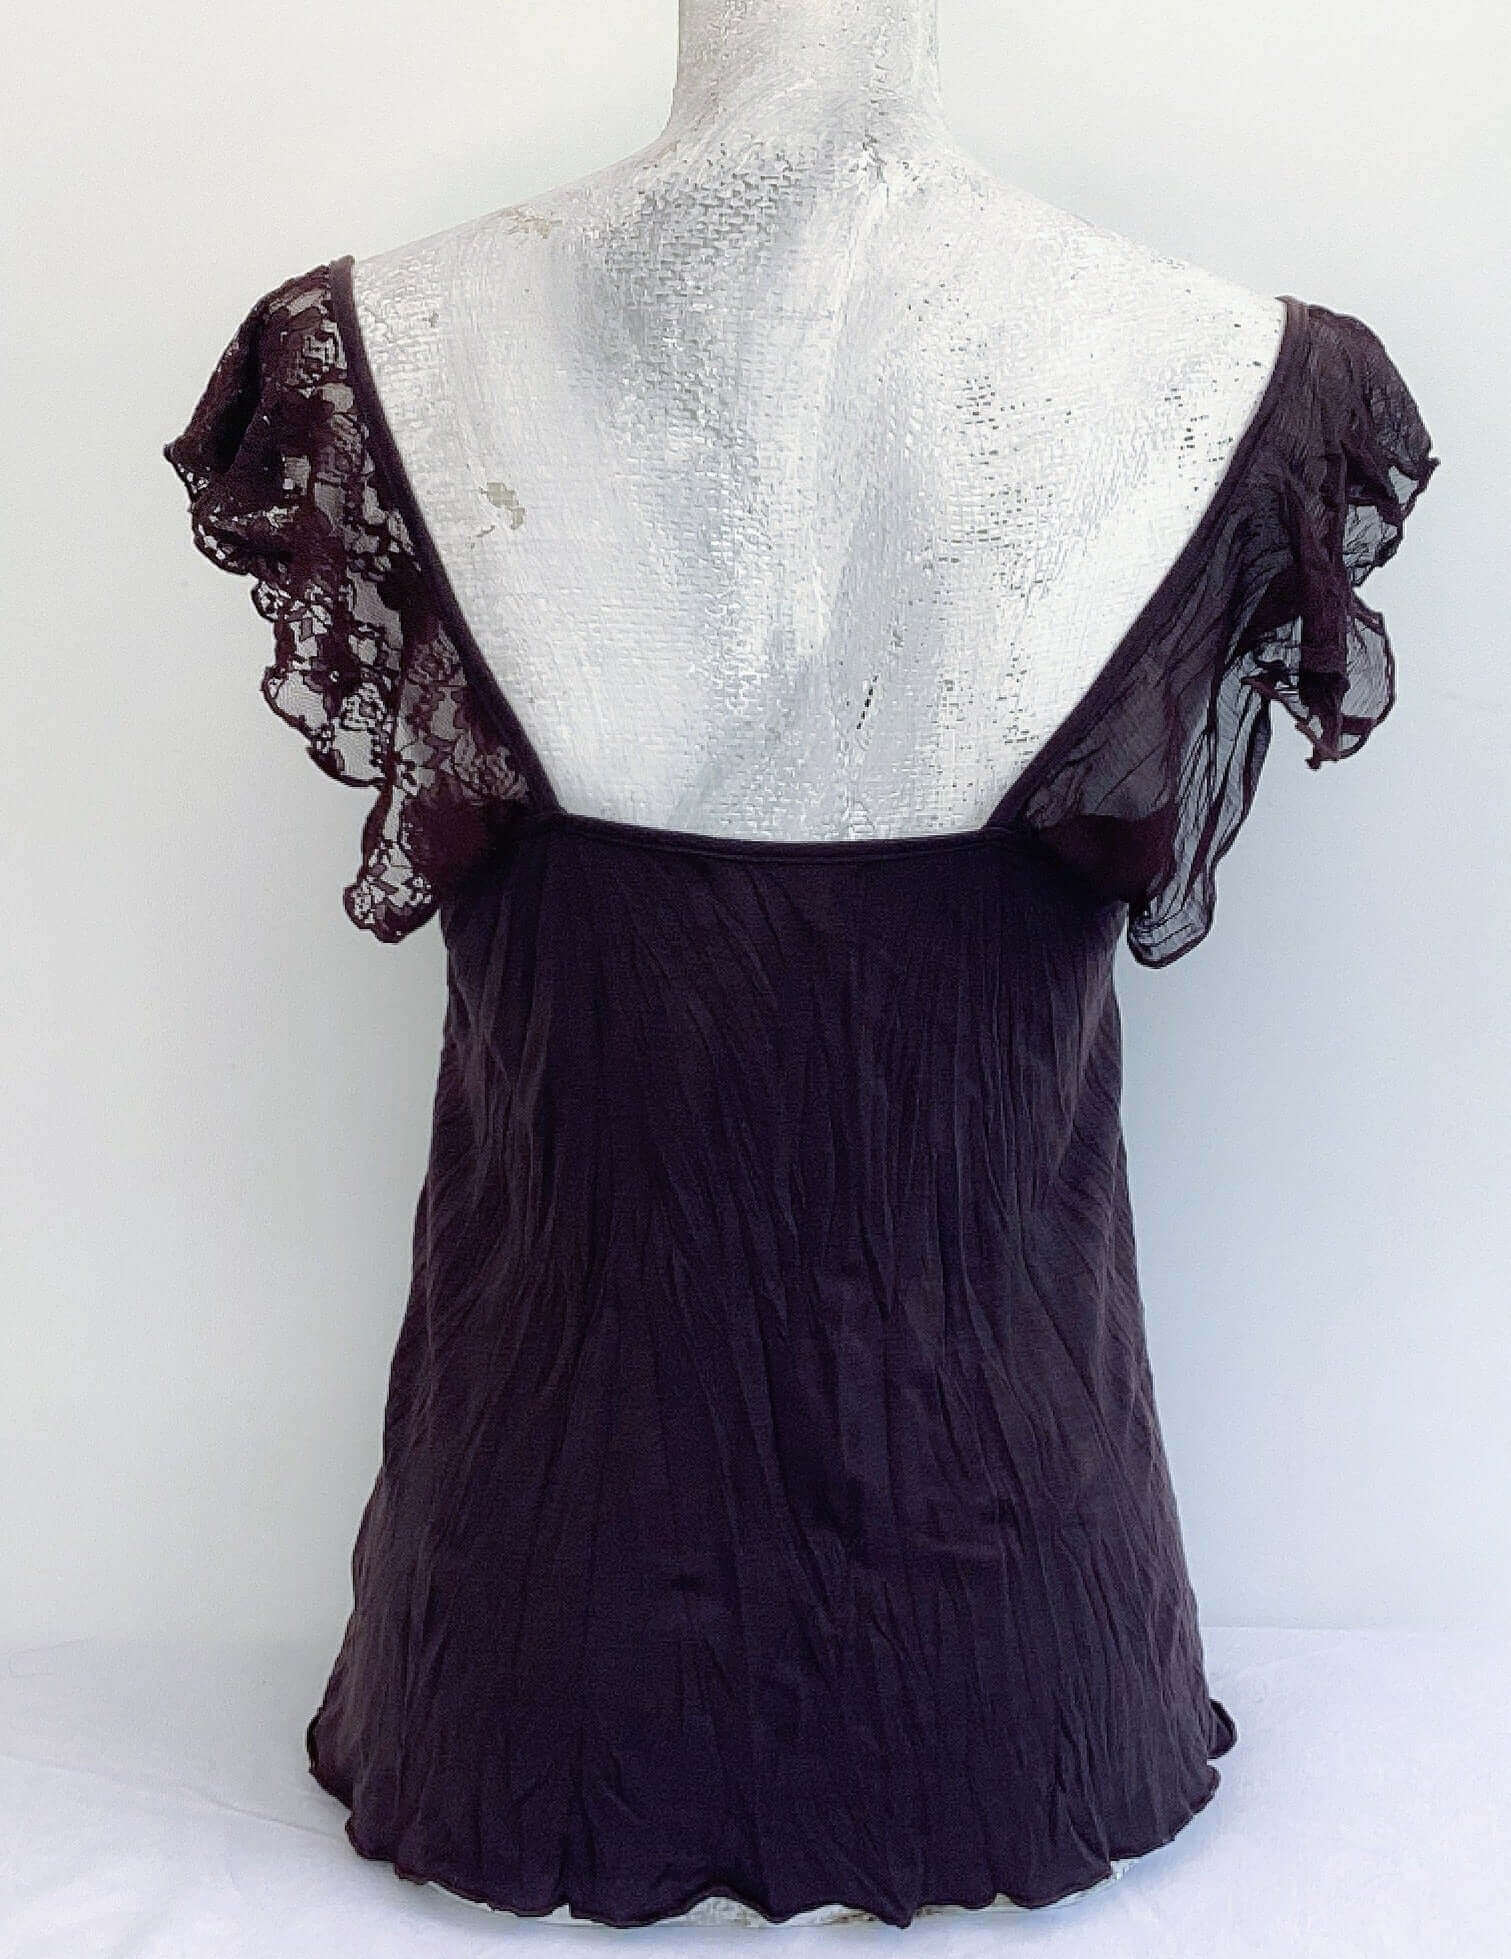 Back view of camisole, showing contrasting, patterned, wide chiffon frill straps.